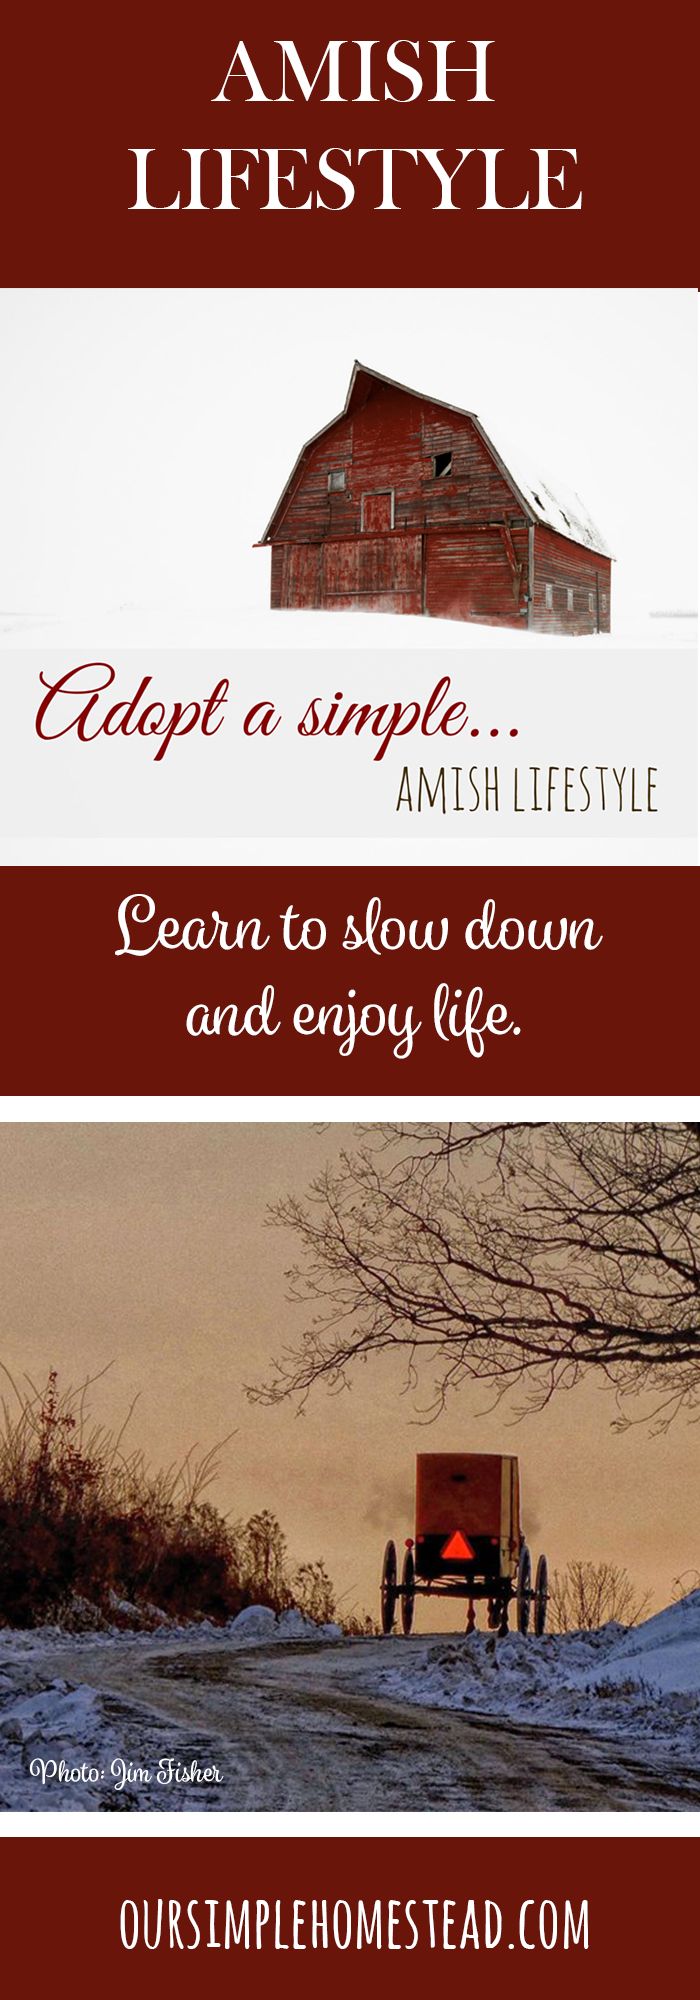 Amish Lifestyle - Learning to slow down and enjoy life can seem overwhelming, bu...